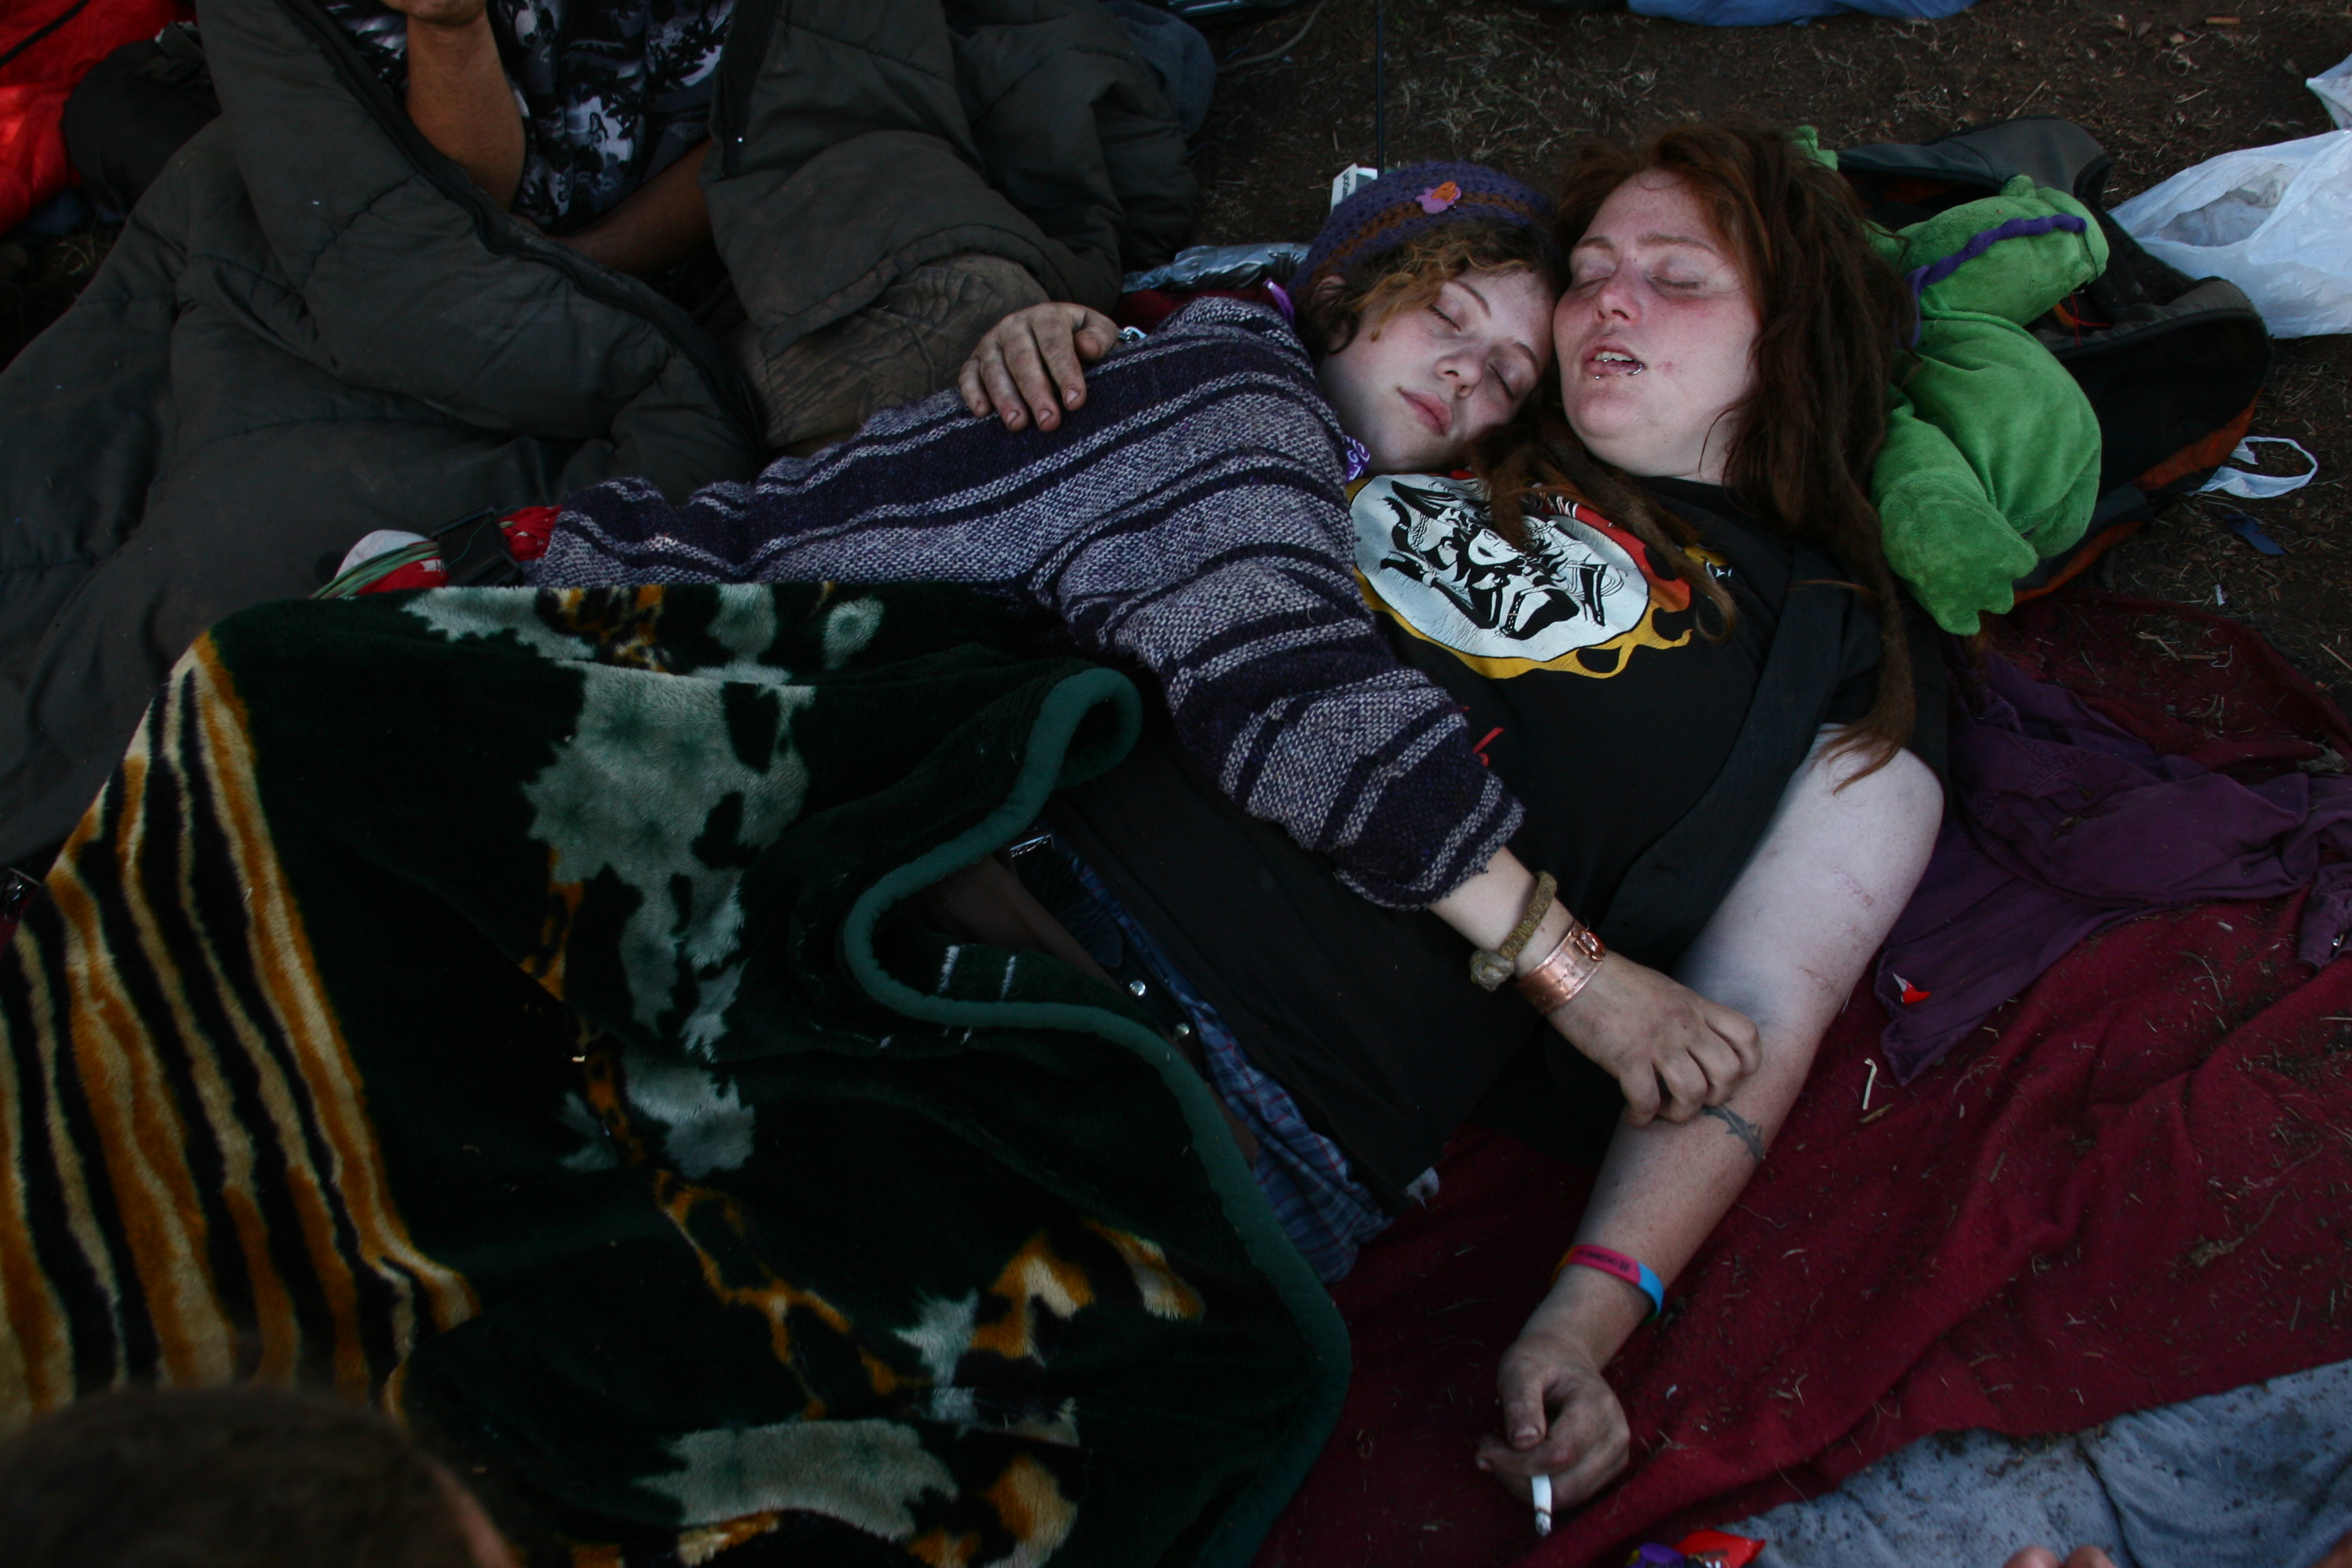 Moe and Sicka fall asleep in each other's arms. New Mexico. 2009. Photo: Kitra Cahana